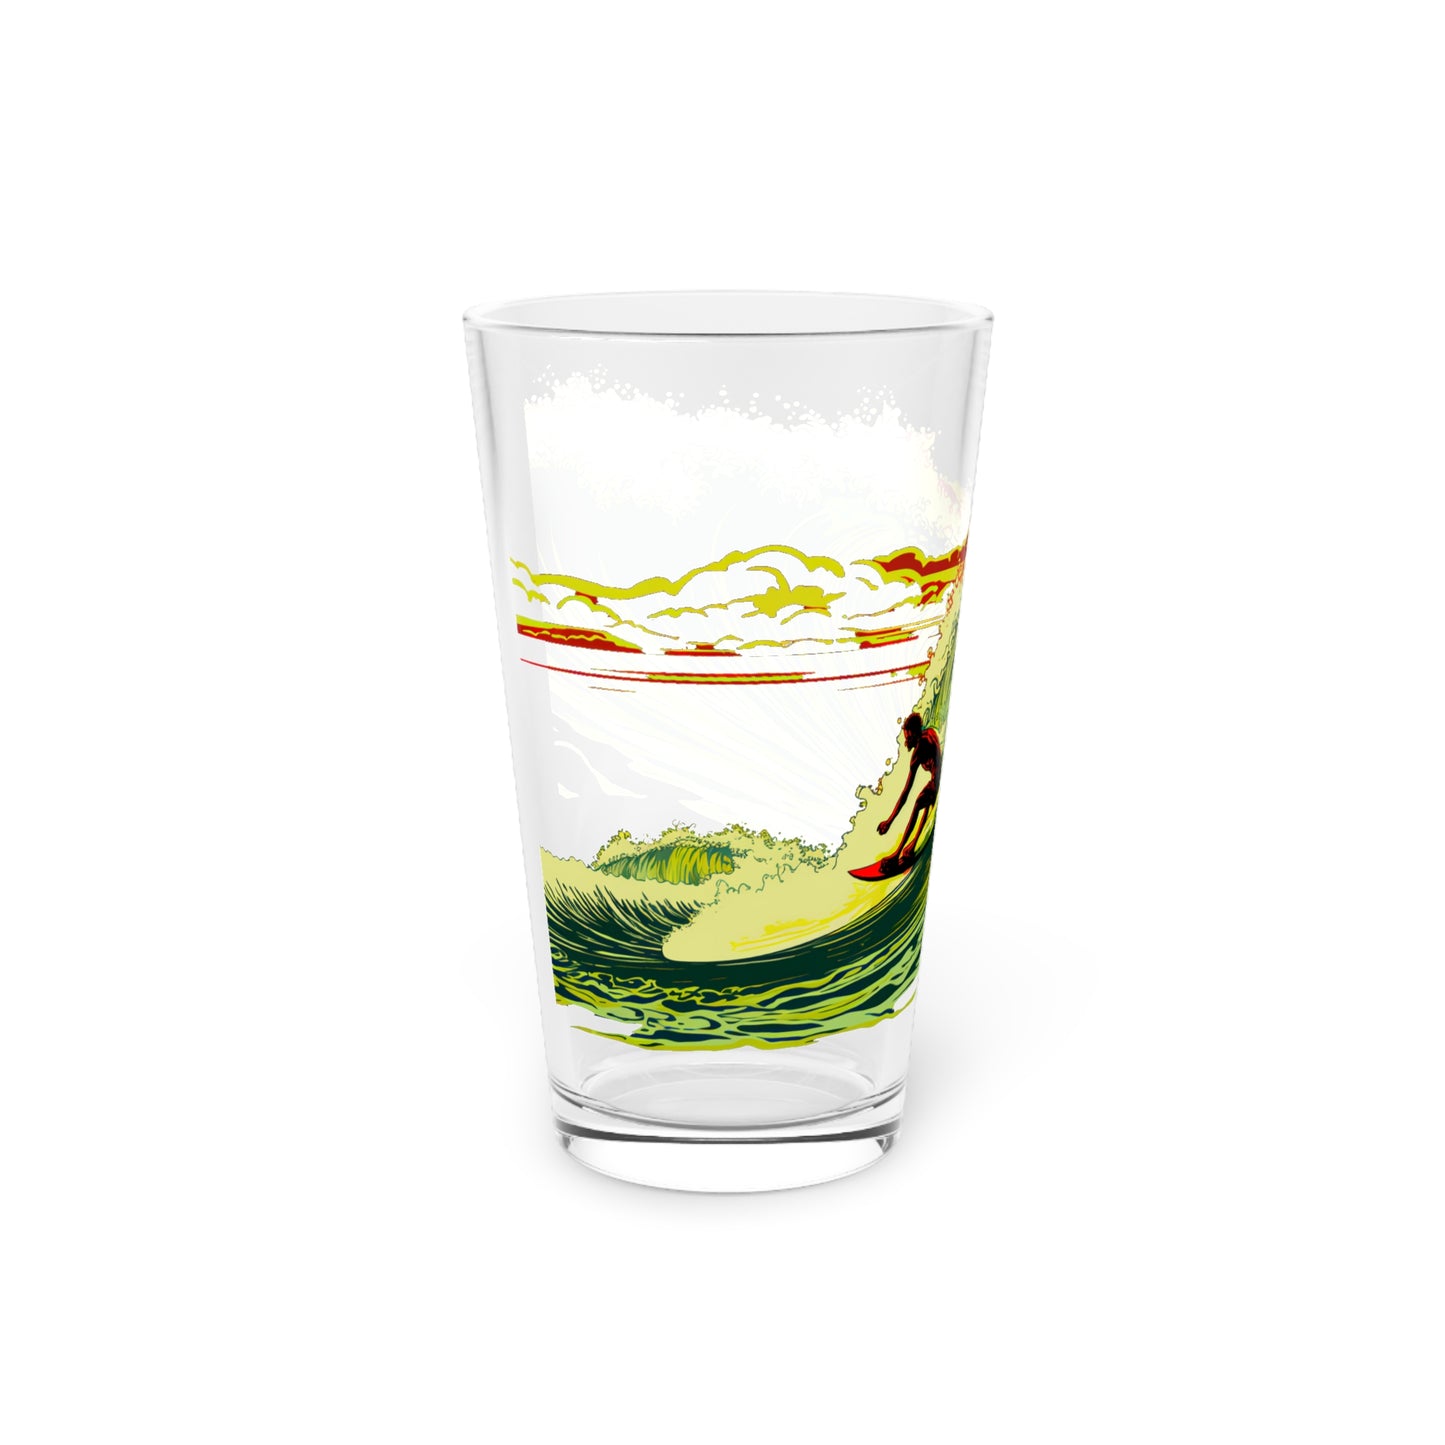 Dive into the spirit of Hawaii with our Surfing Wave Art Pint Glass. Exclusive to Stashbox.ai, this 16oz glass showcases vibrant green, yellow, and red waves, capturing the essence of the Hawaiian surf. Elevate your drinking experience today!